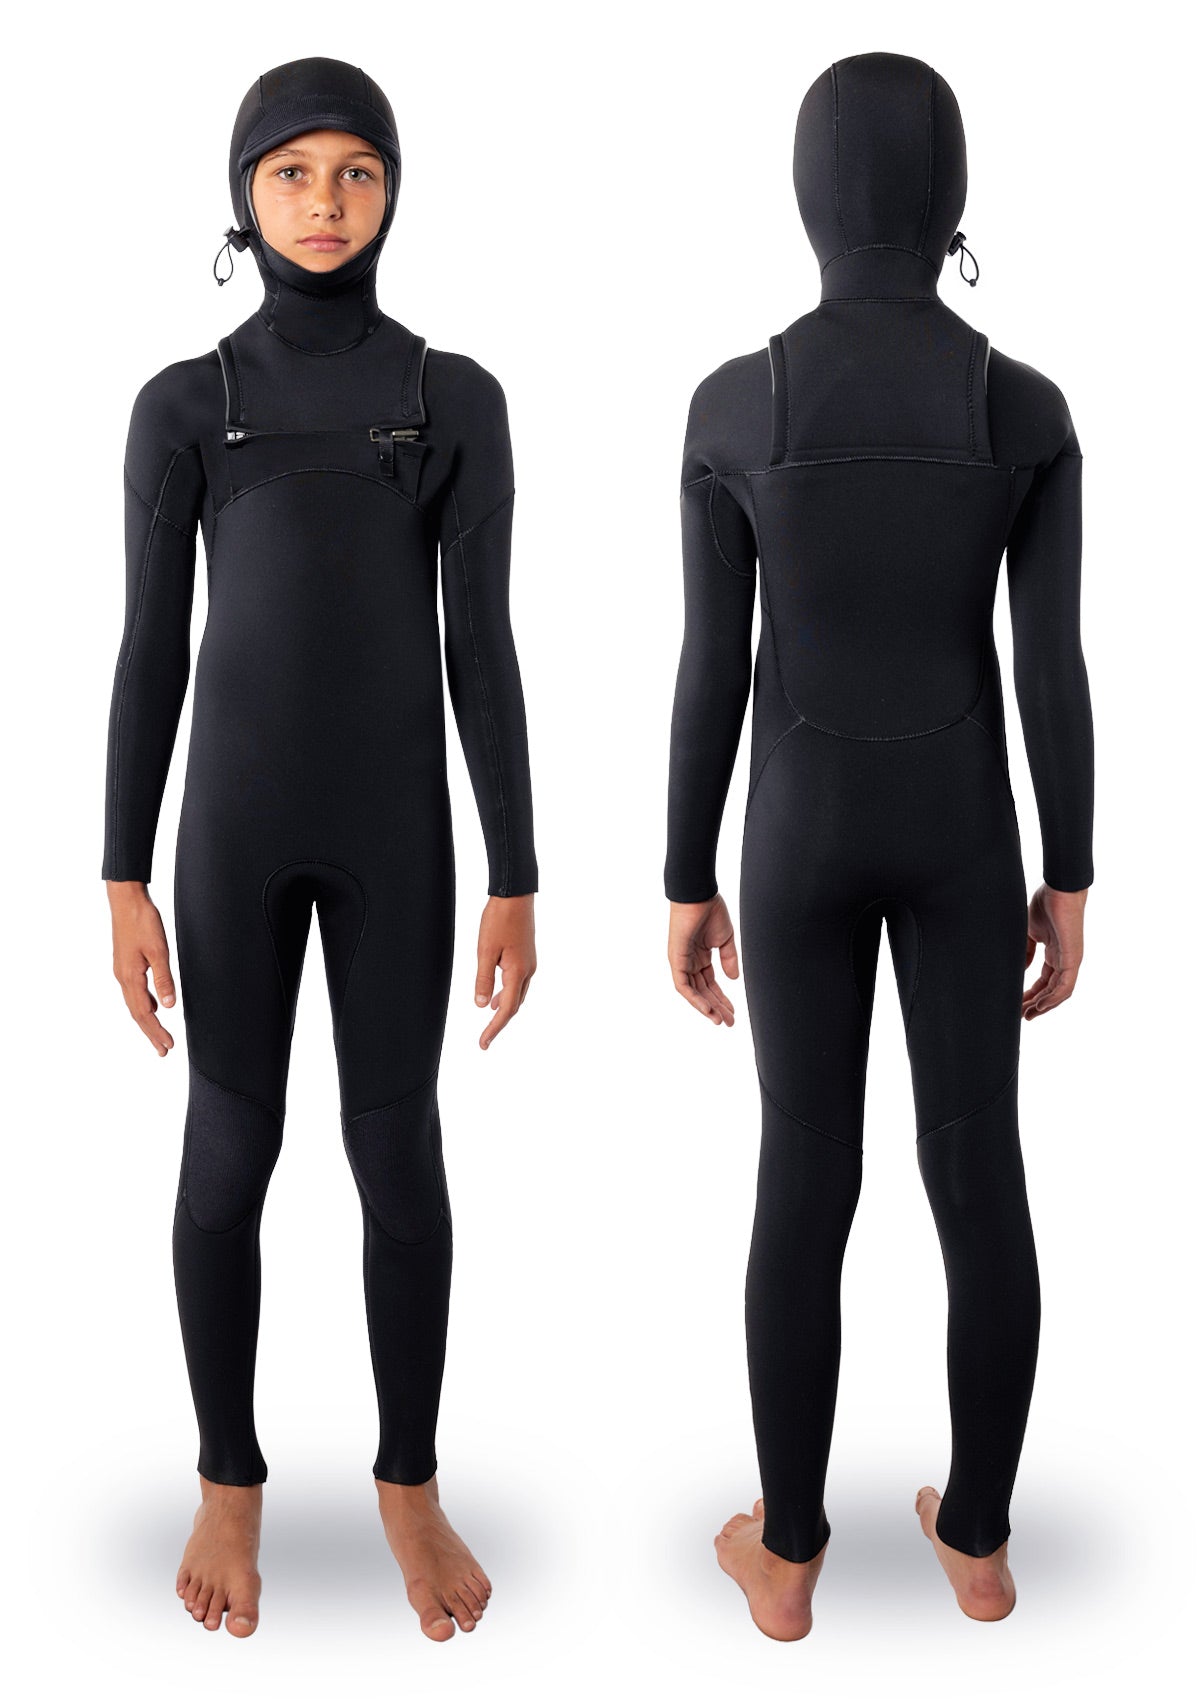 Kids 5/4 Hooded Thermal Chest Zip Wetsuit